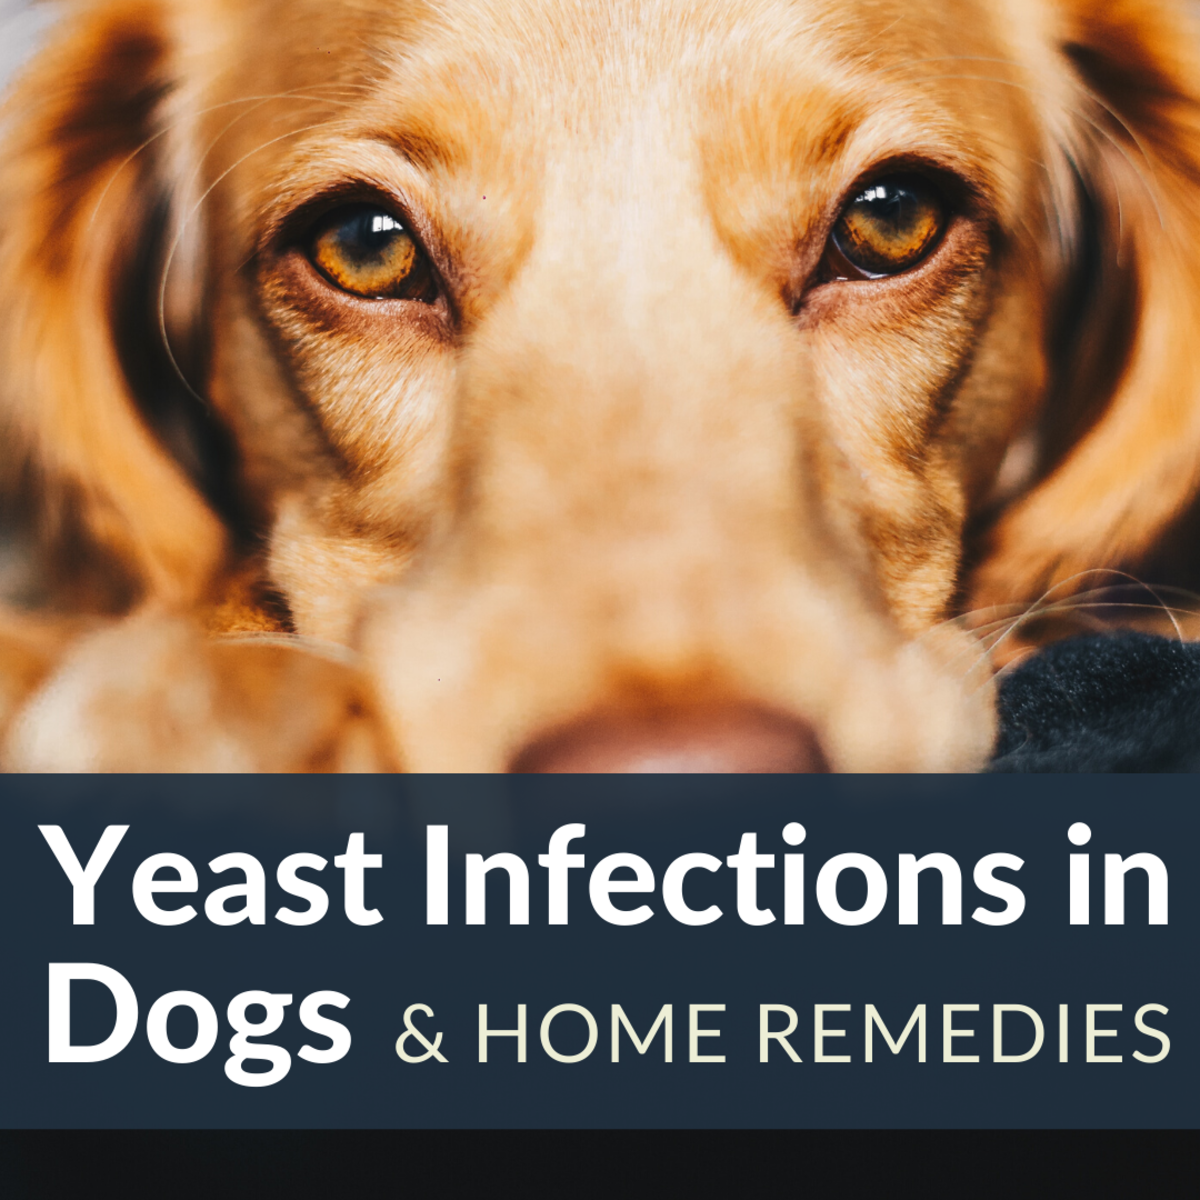 How to Stop Hair Loss and Itching in Dogs From Yeast Overgrowth ...